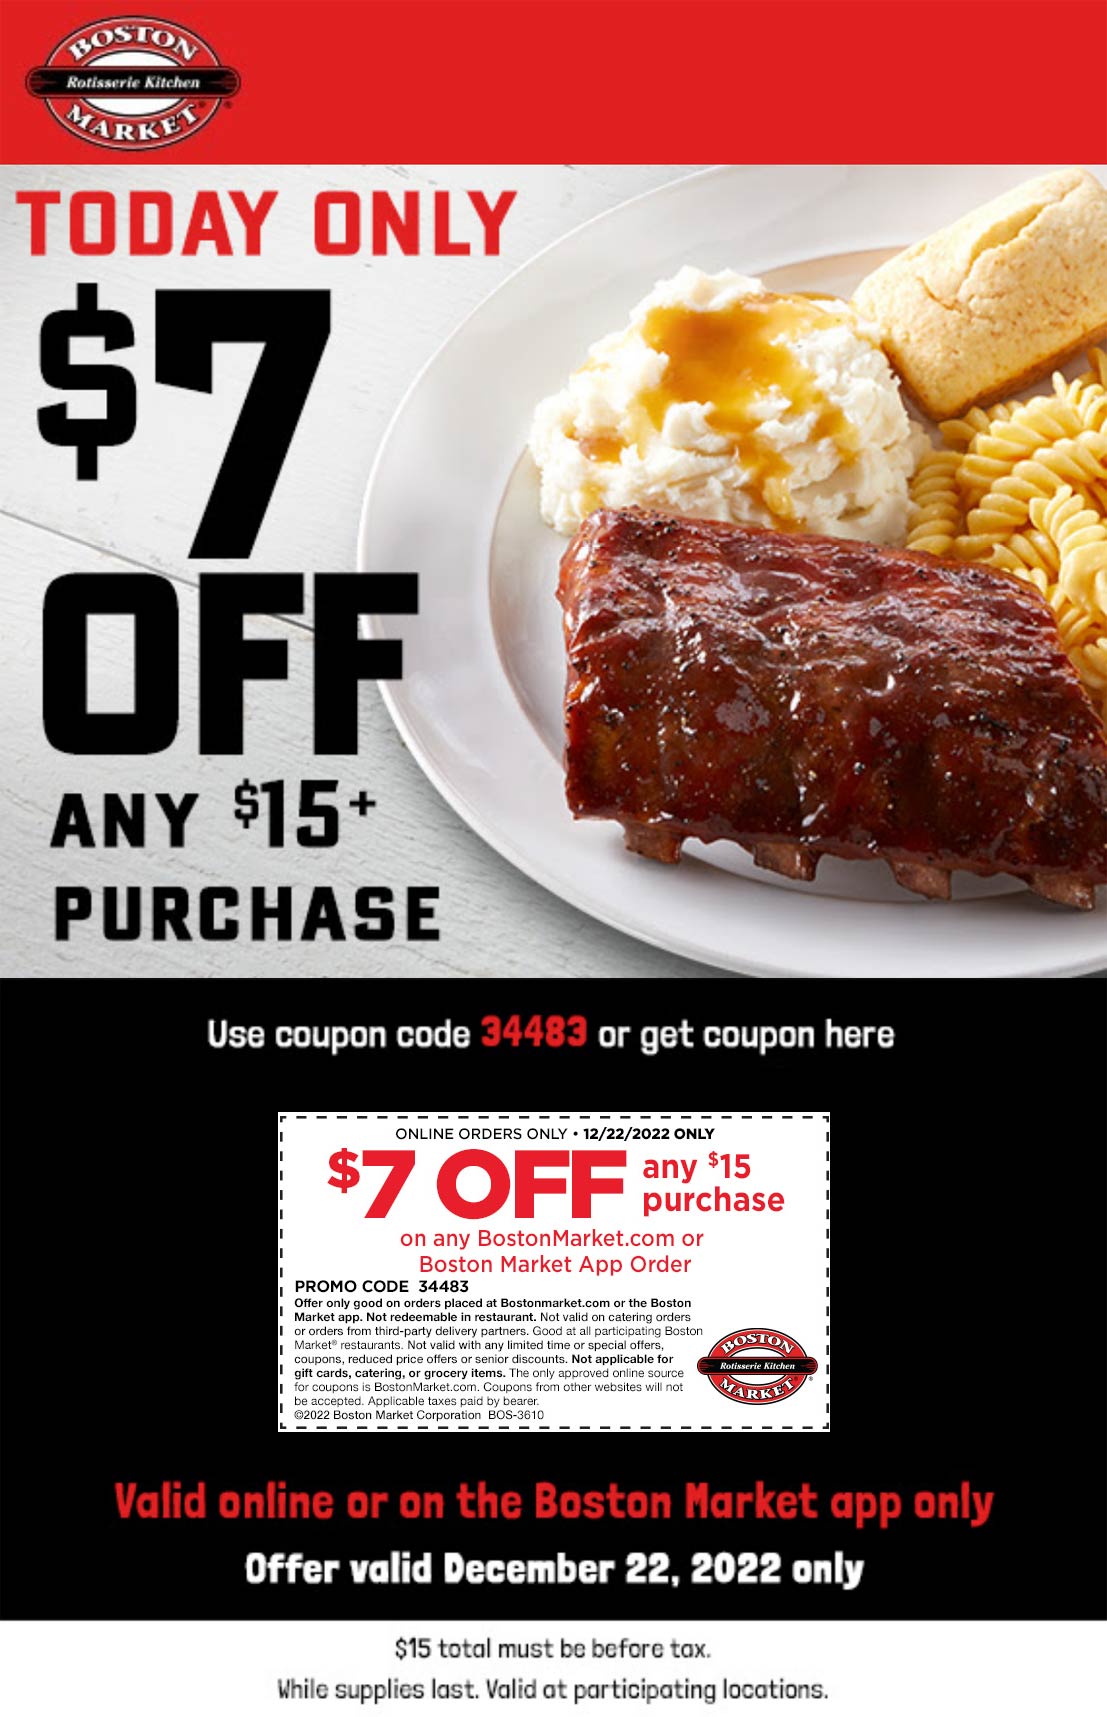 Boston Market restaurants Coupon  $7 off $15 today at Boston Market restaurants #bostonmarket 